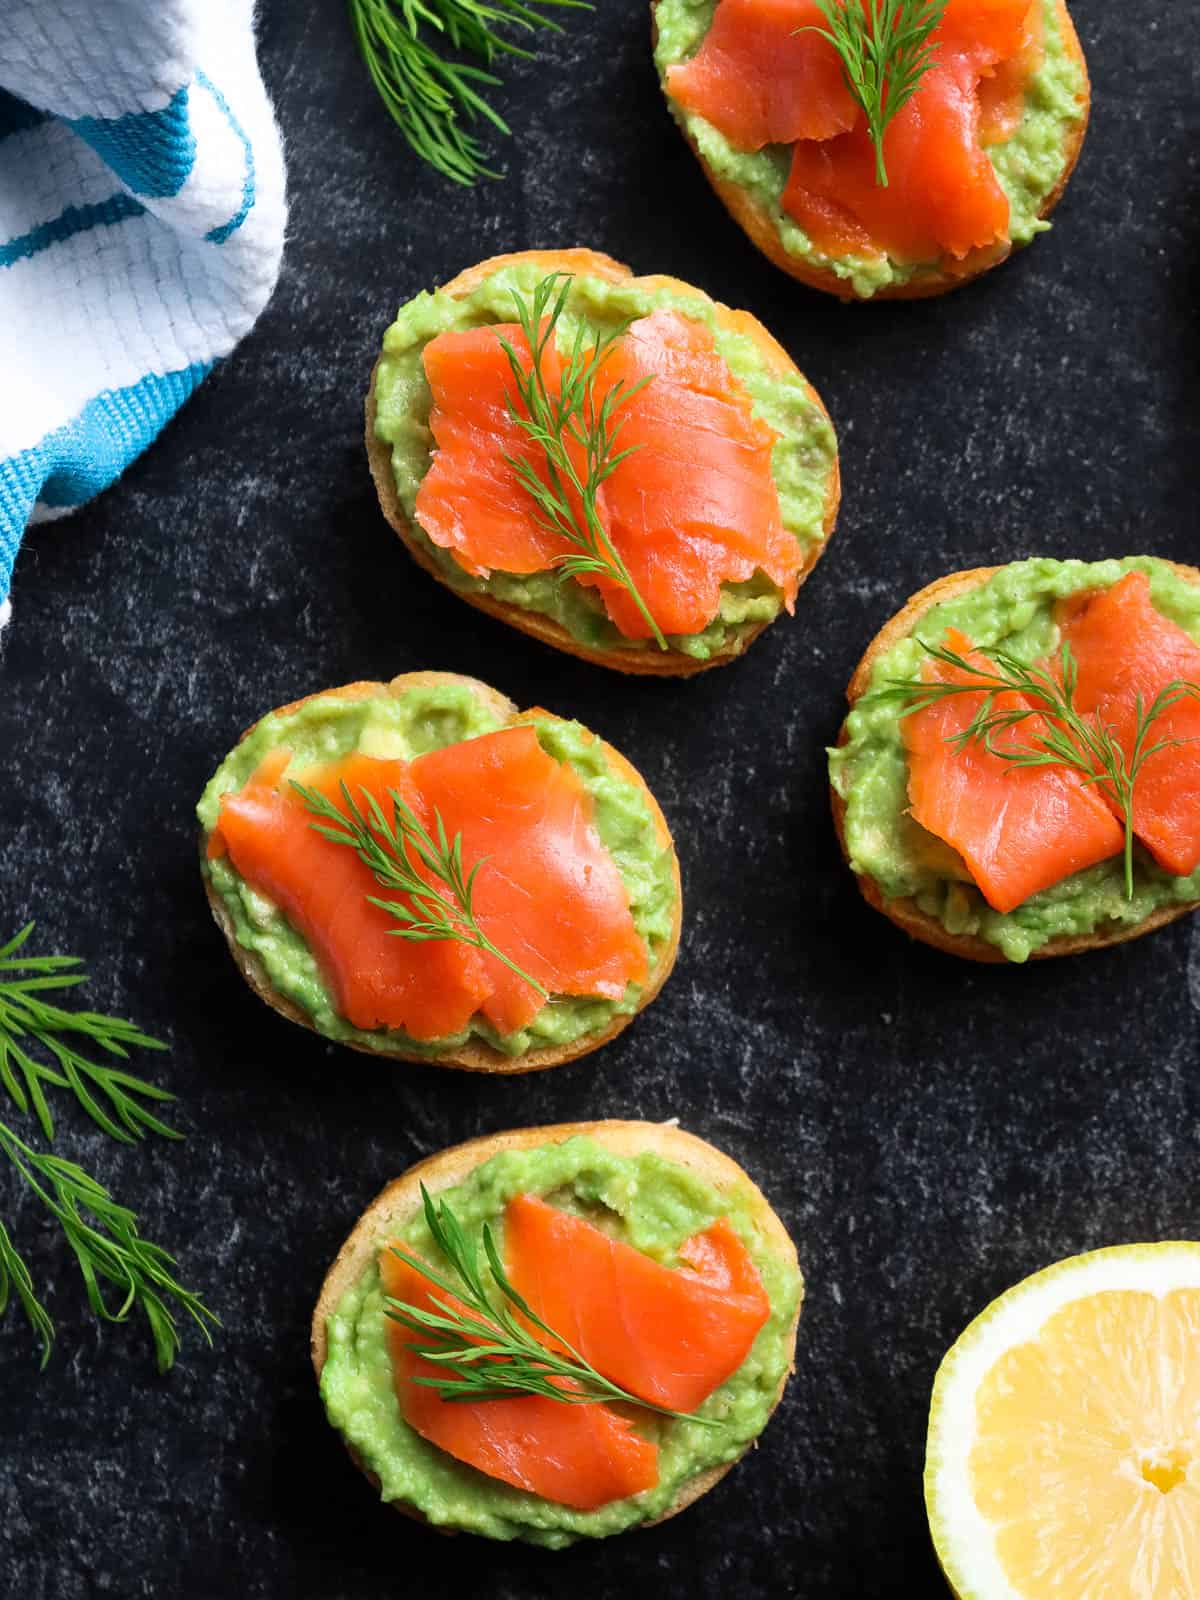 These Salmon Avocado Sandwiches are super easy, healthy and the perfect appetizer to serve at your next party or enjoy as a delicious breakfast alternative.